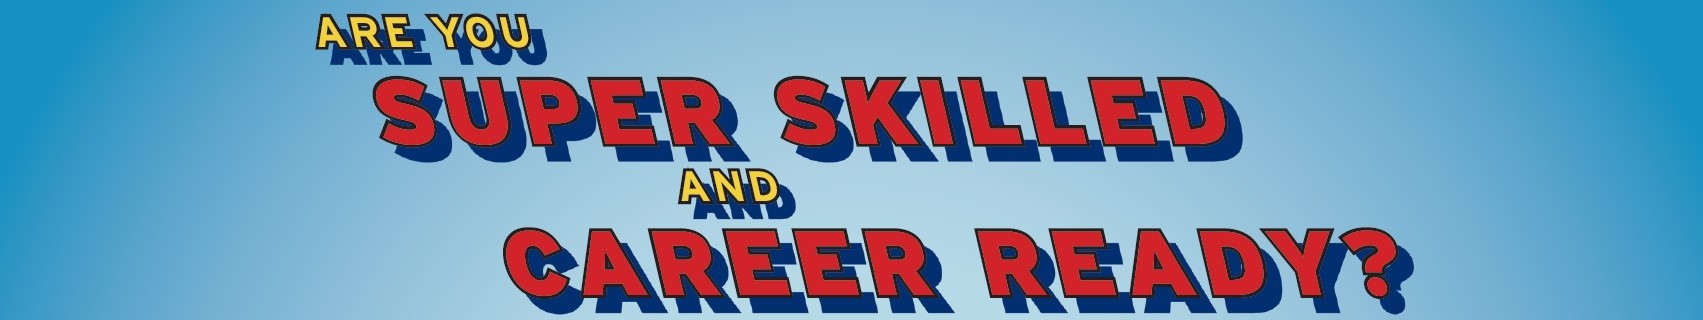 Are you super skilled and career ready?